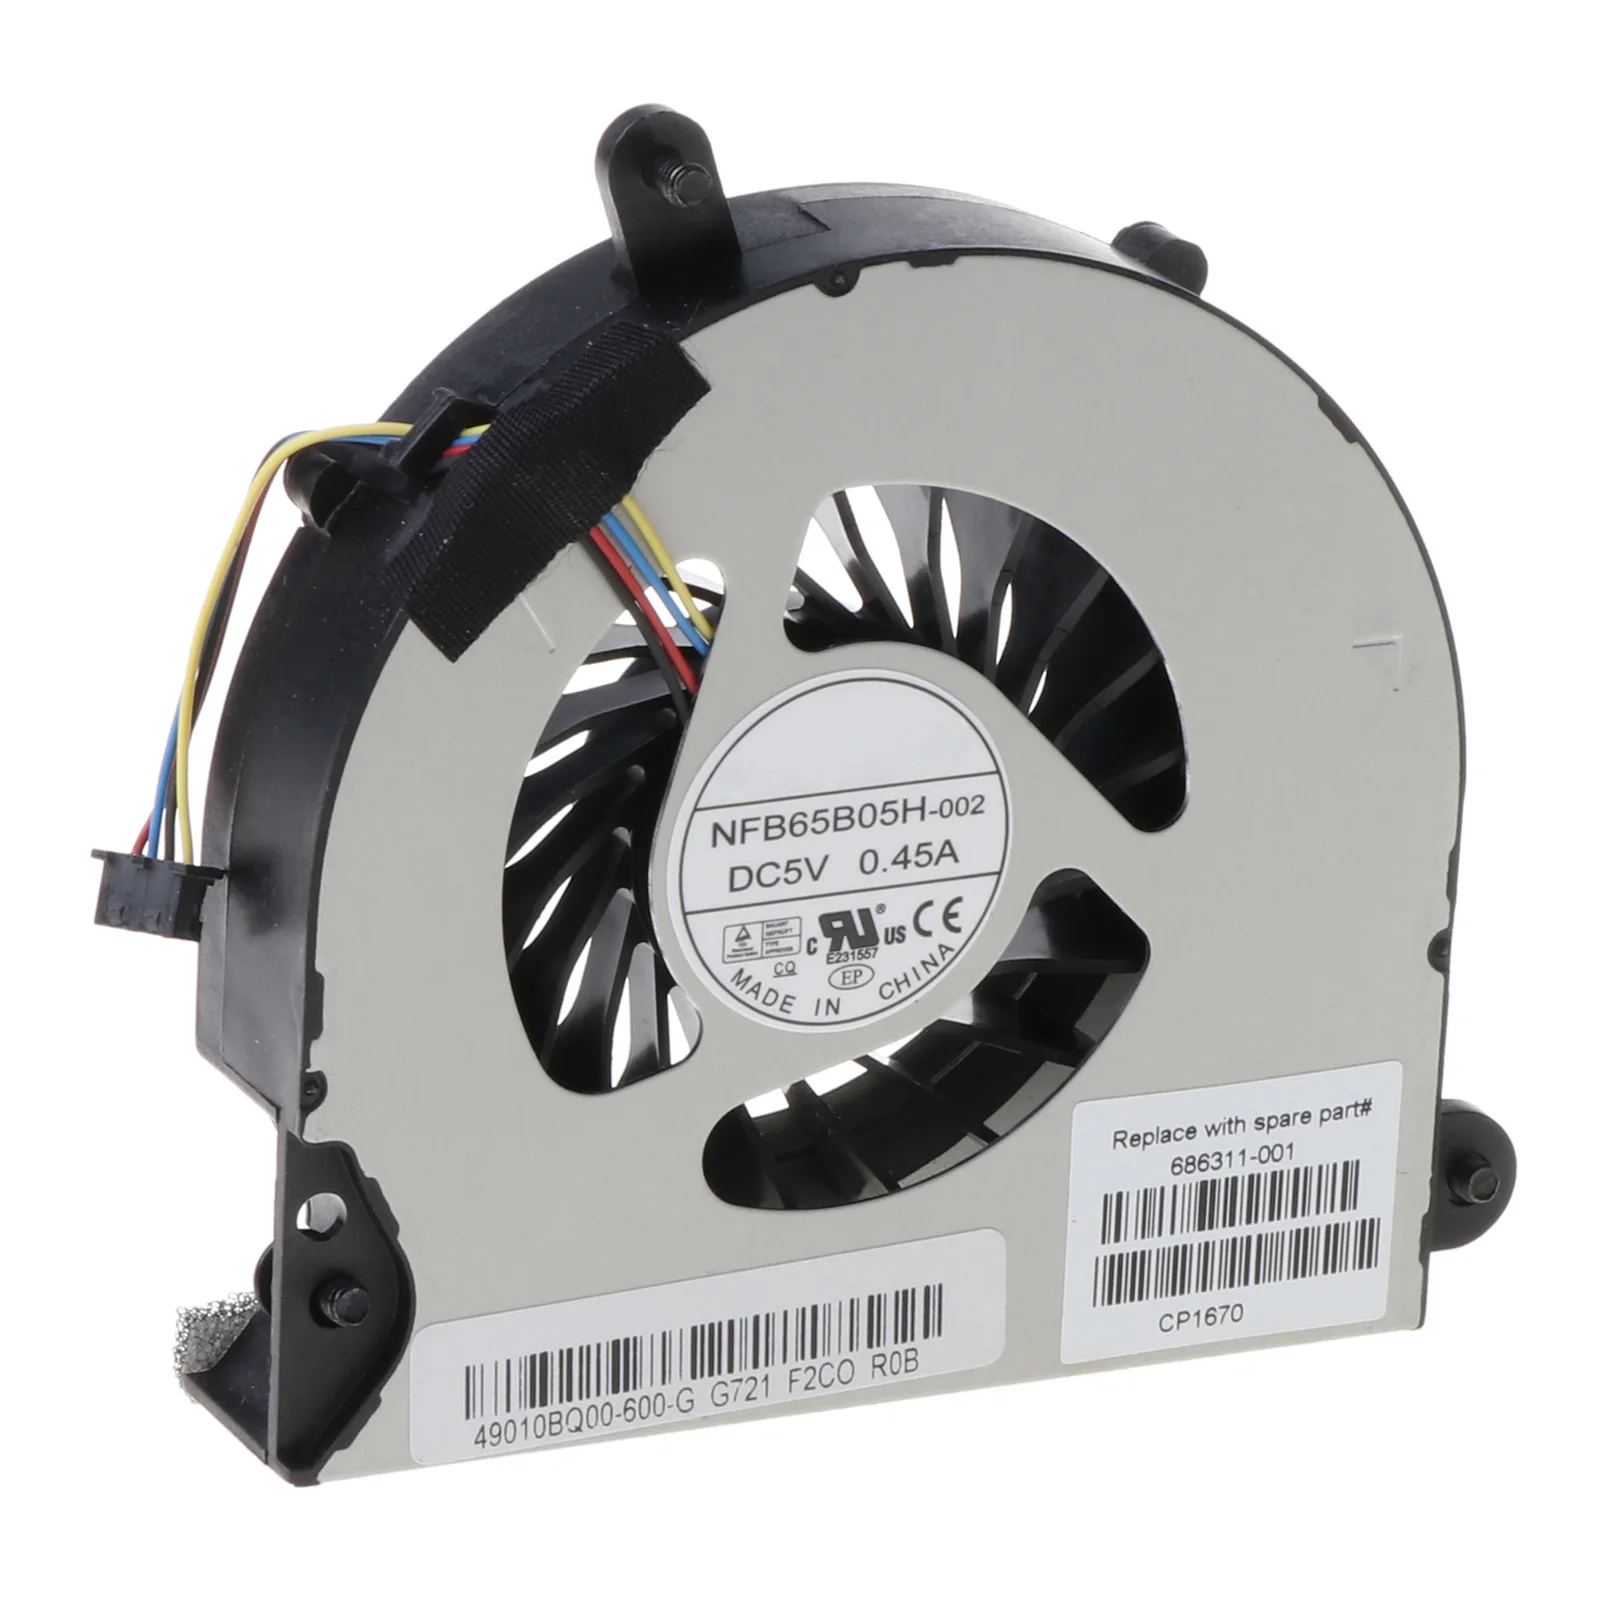 QUETTERLEE Replacement New CPU Cooling Fan for HP Elitebook 8560p 8570p for HP Probook 6570B 6560B 6565B Series 4-Pin 4-Wire P/N 686311-001 641183-001 MF60120V1-C470-S9A NFB65B05H-002 Fan 